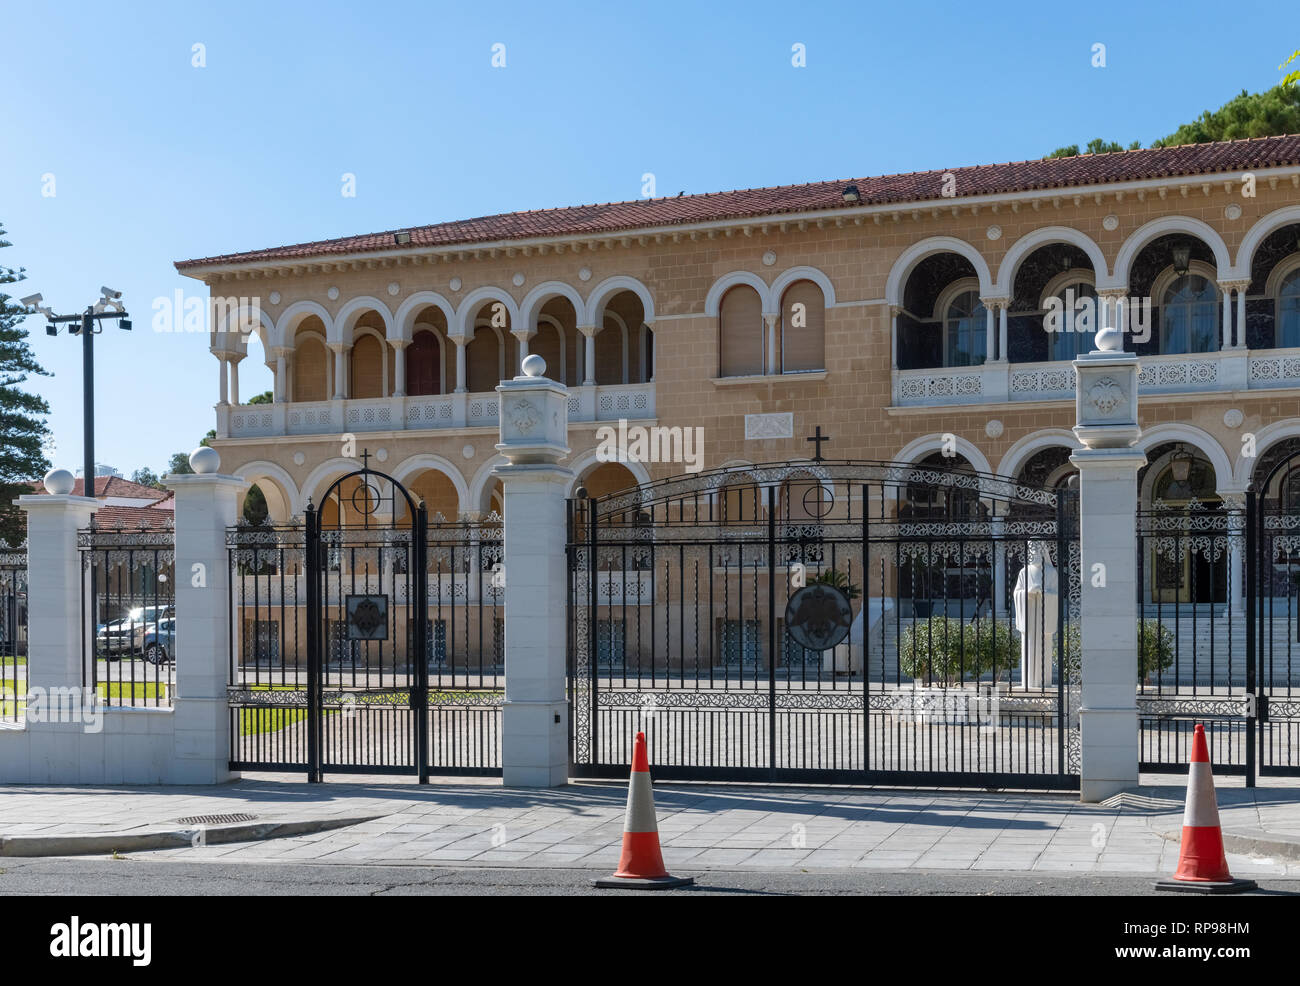 Ancient archbishop's palace in greek part of old city in nicosia, cyprus Stock Photo